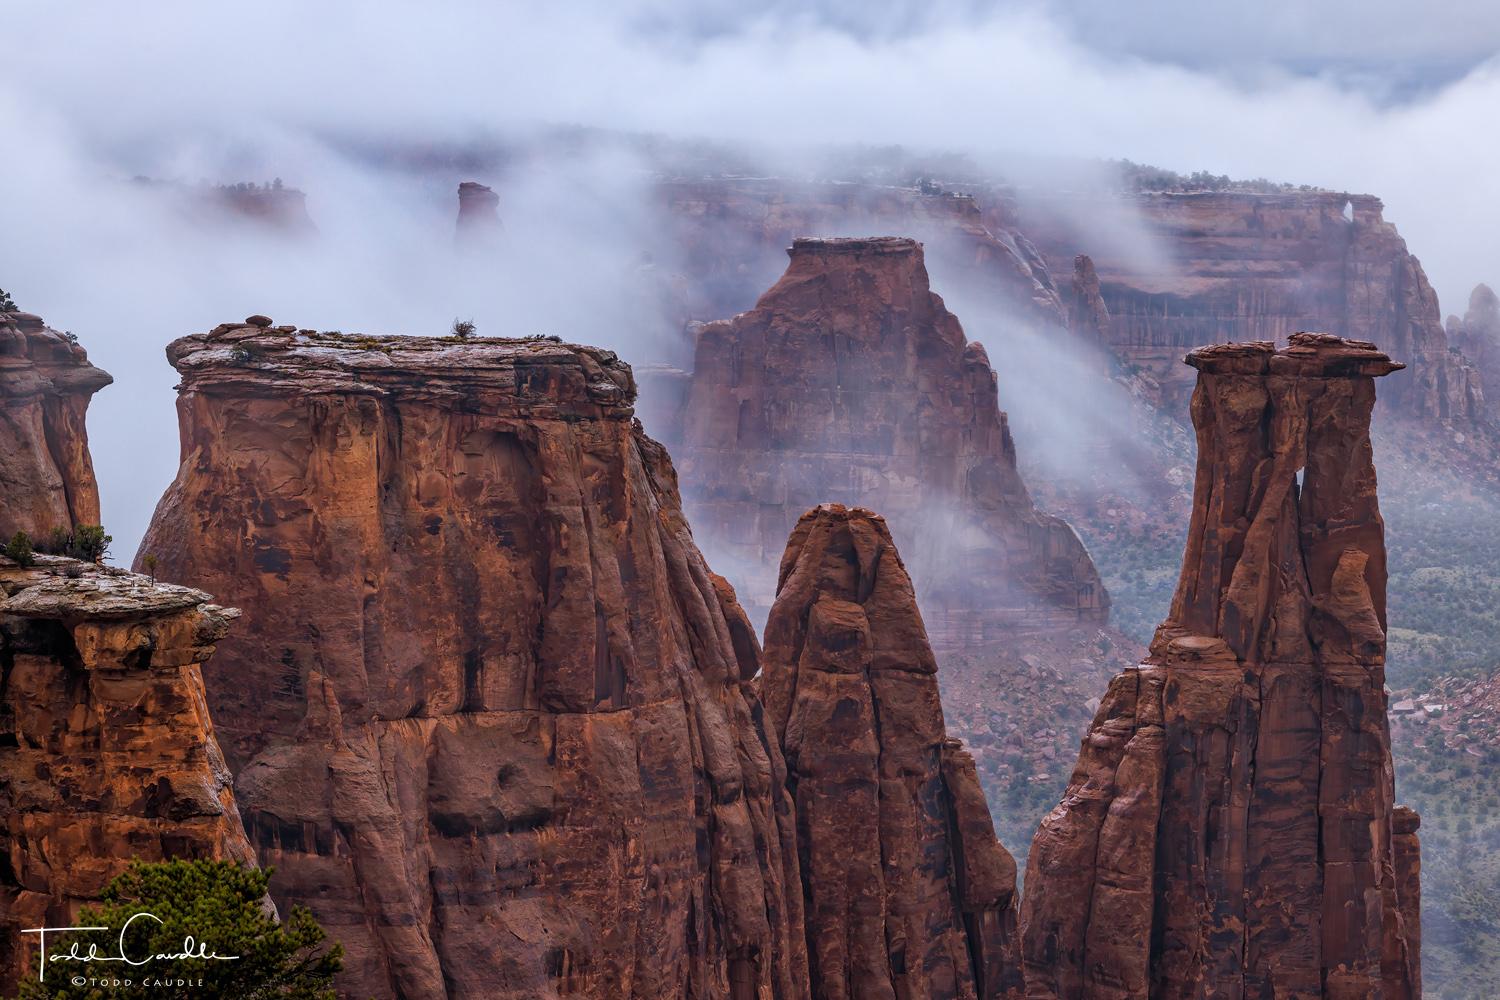 After rain fell most of the night, morning fog spills into Monument Canyon, swirling around the monolithic sandstone structures...